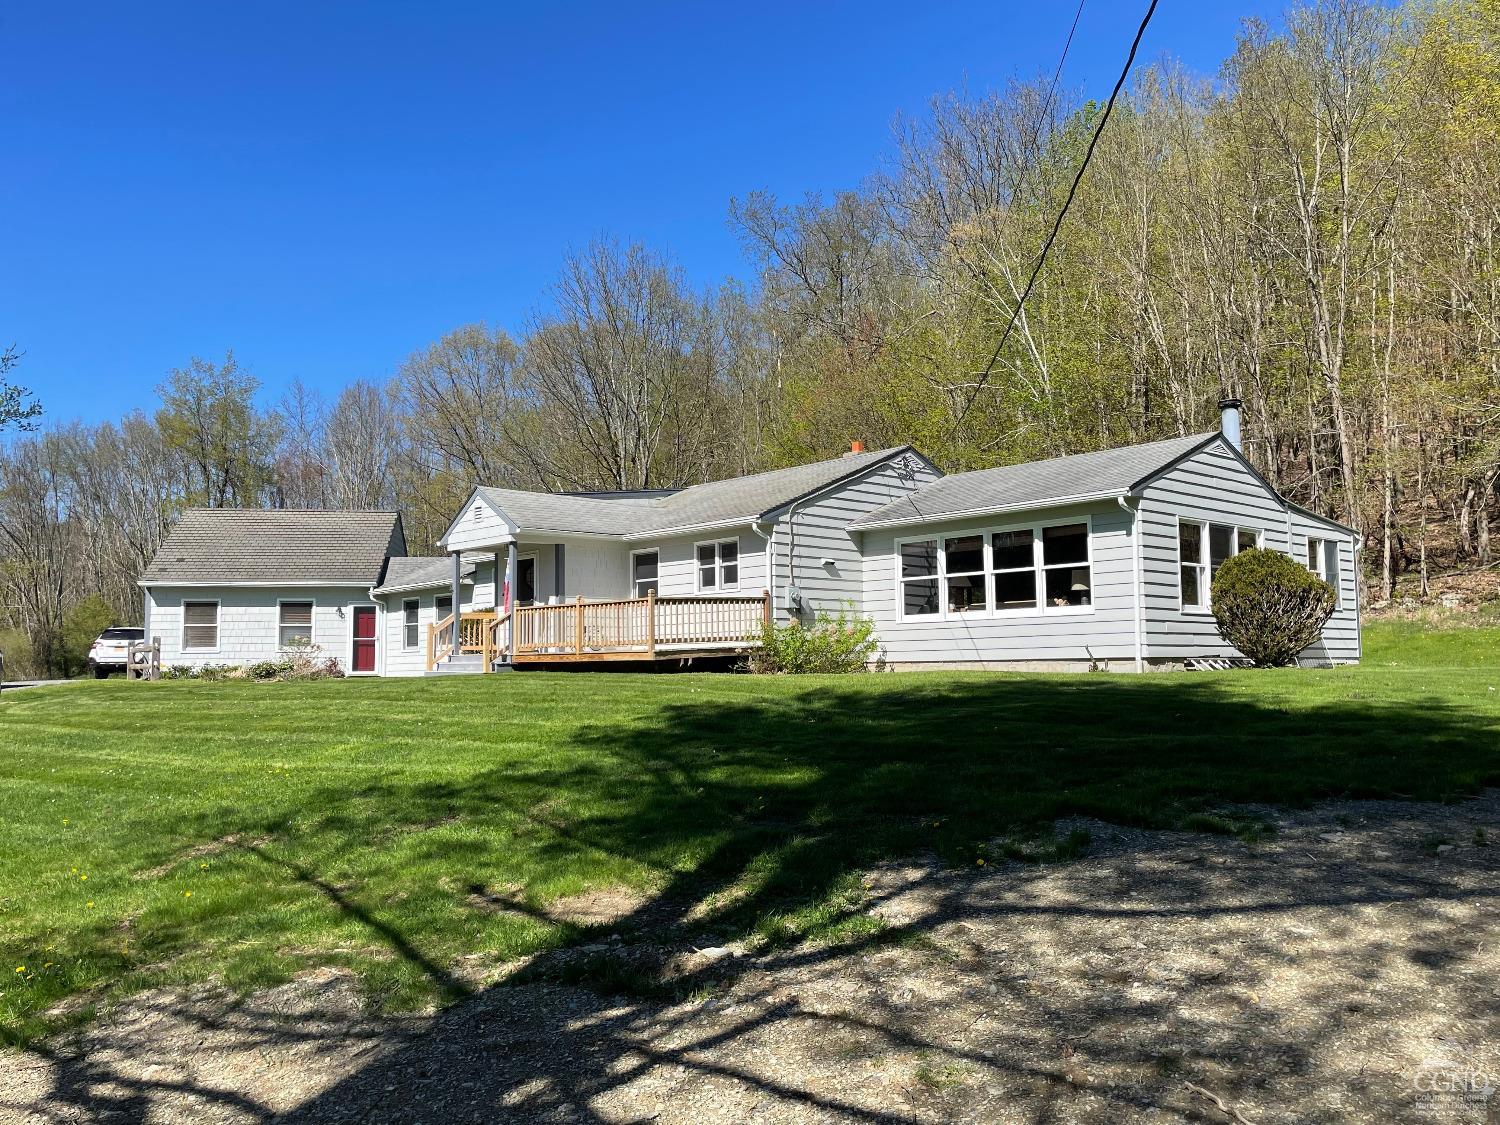 738 County Route 5, Canaan, New York - 4 Bedrooms  
3 Bathrooms  
7 Rooms - 